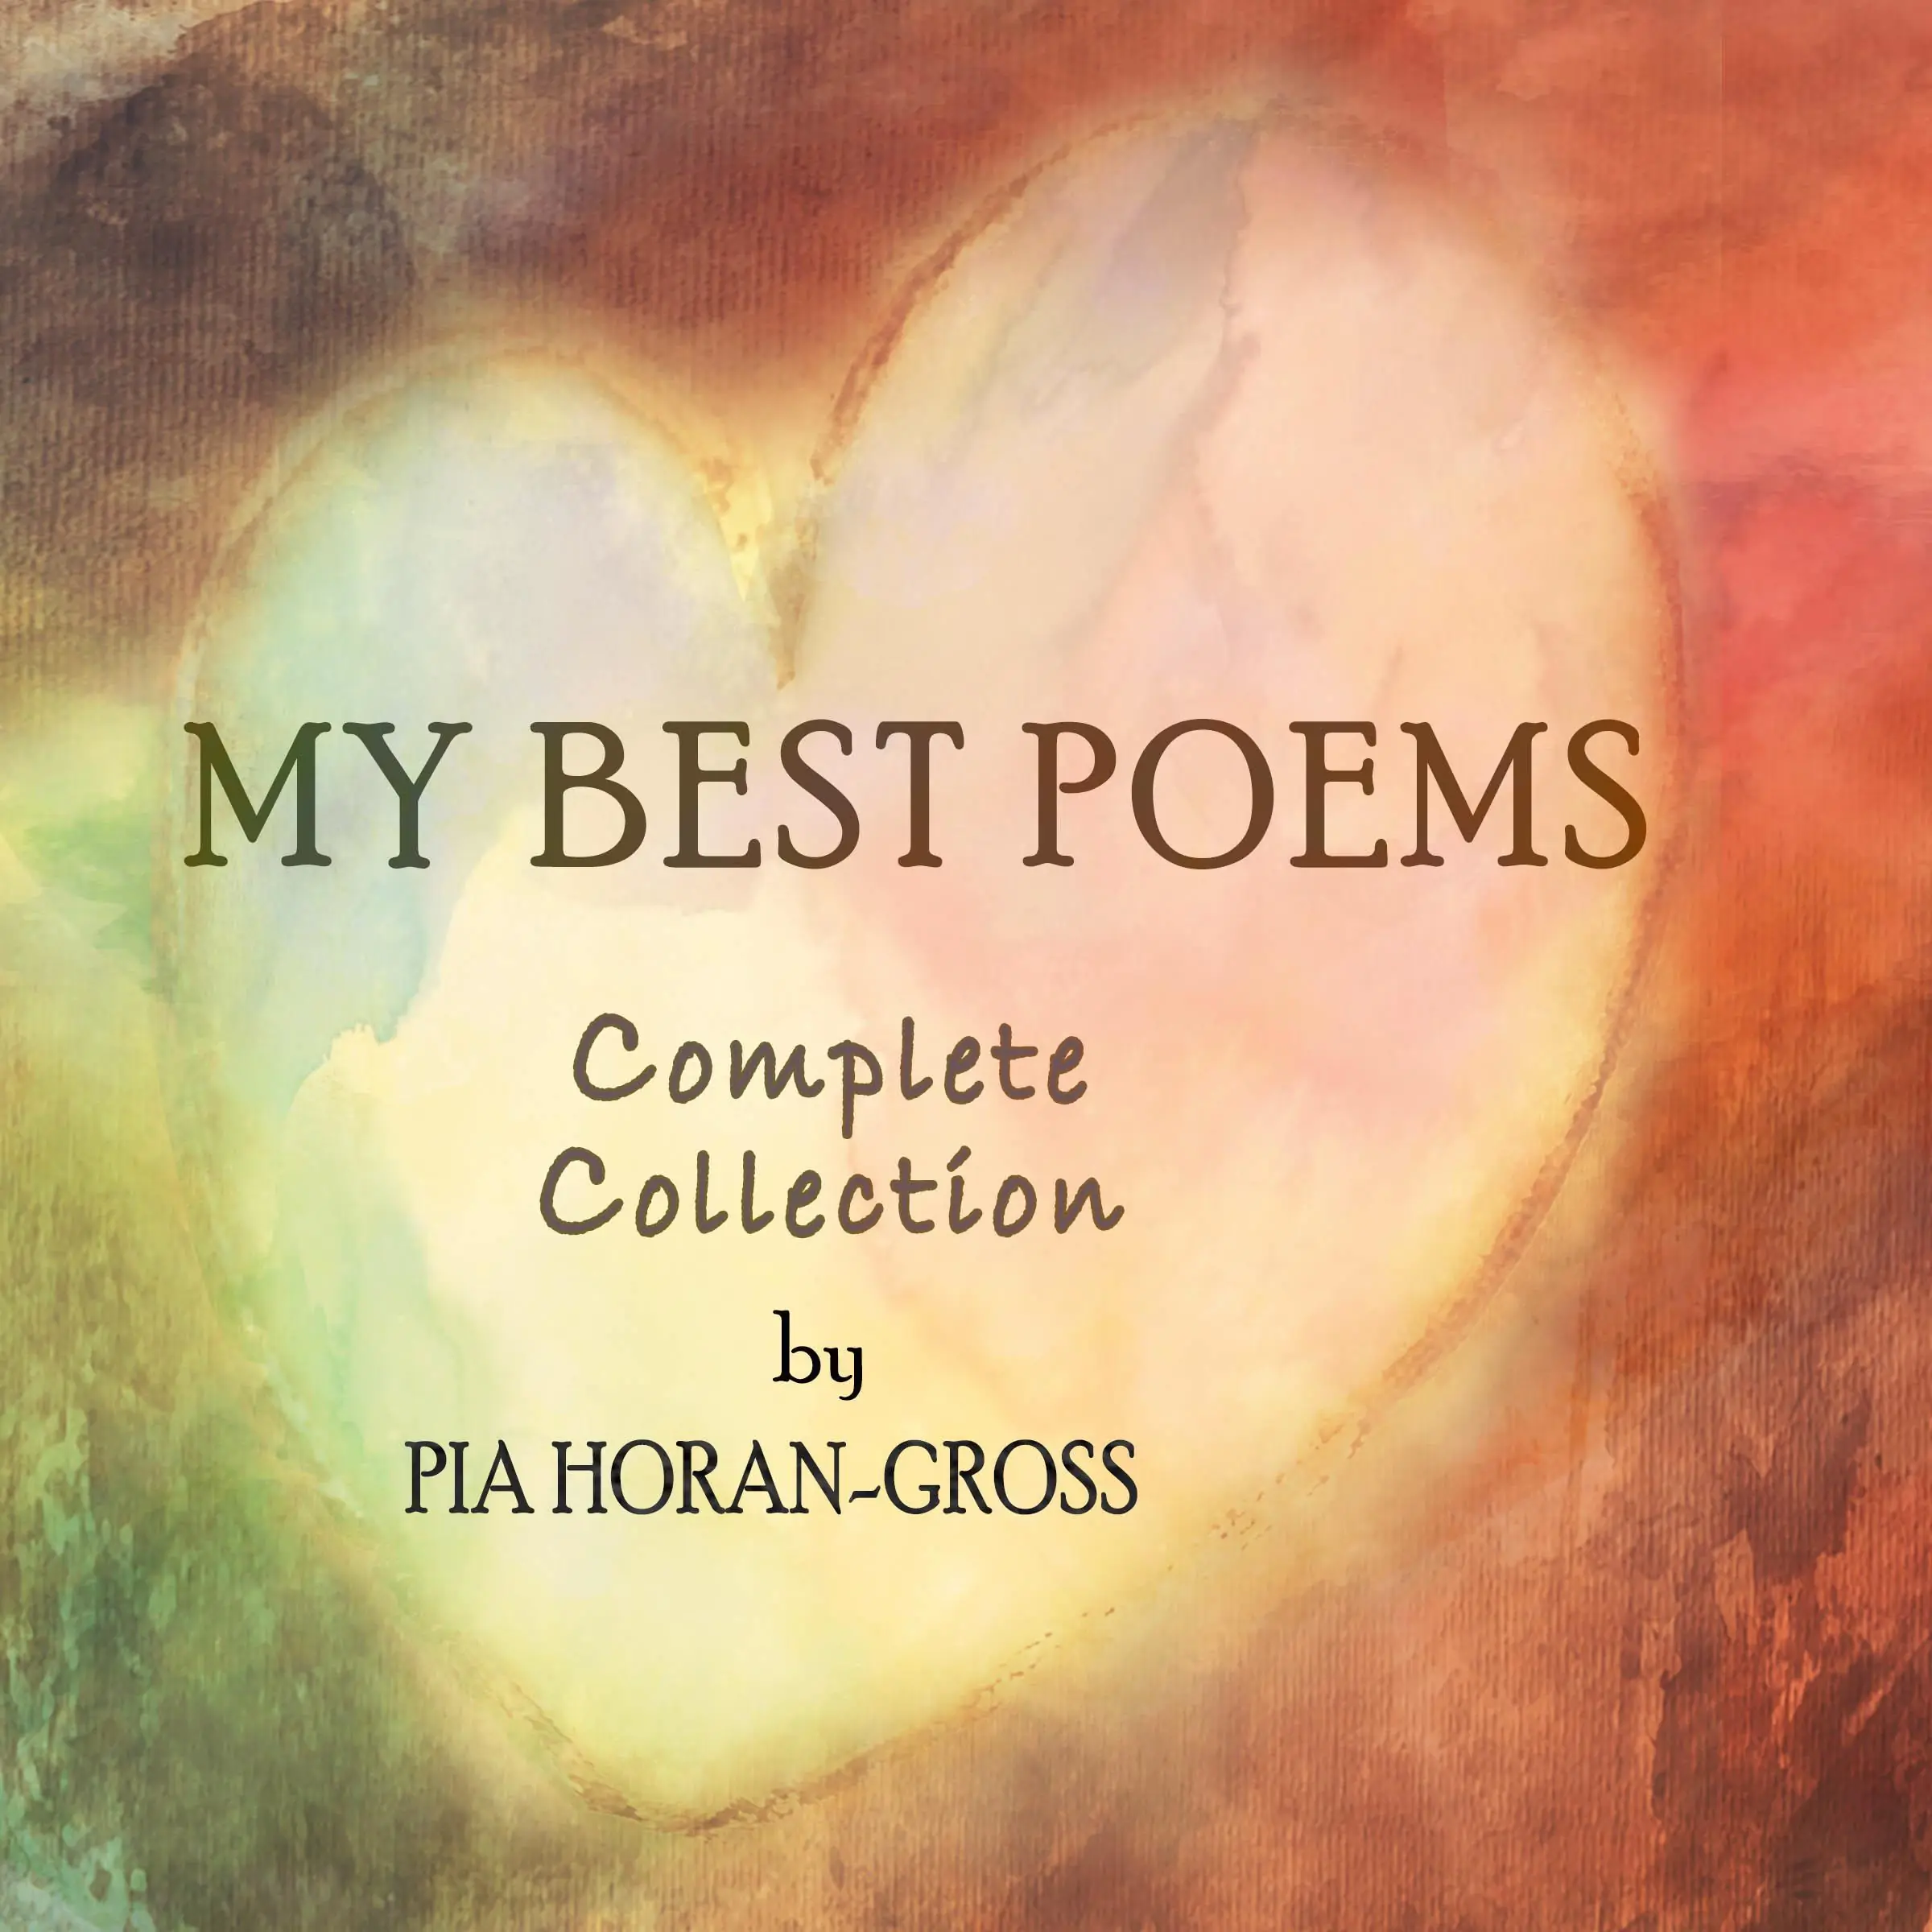 My Best Poems, Complete Collection by Pia Horan-Gross Audiobook